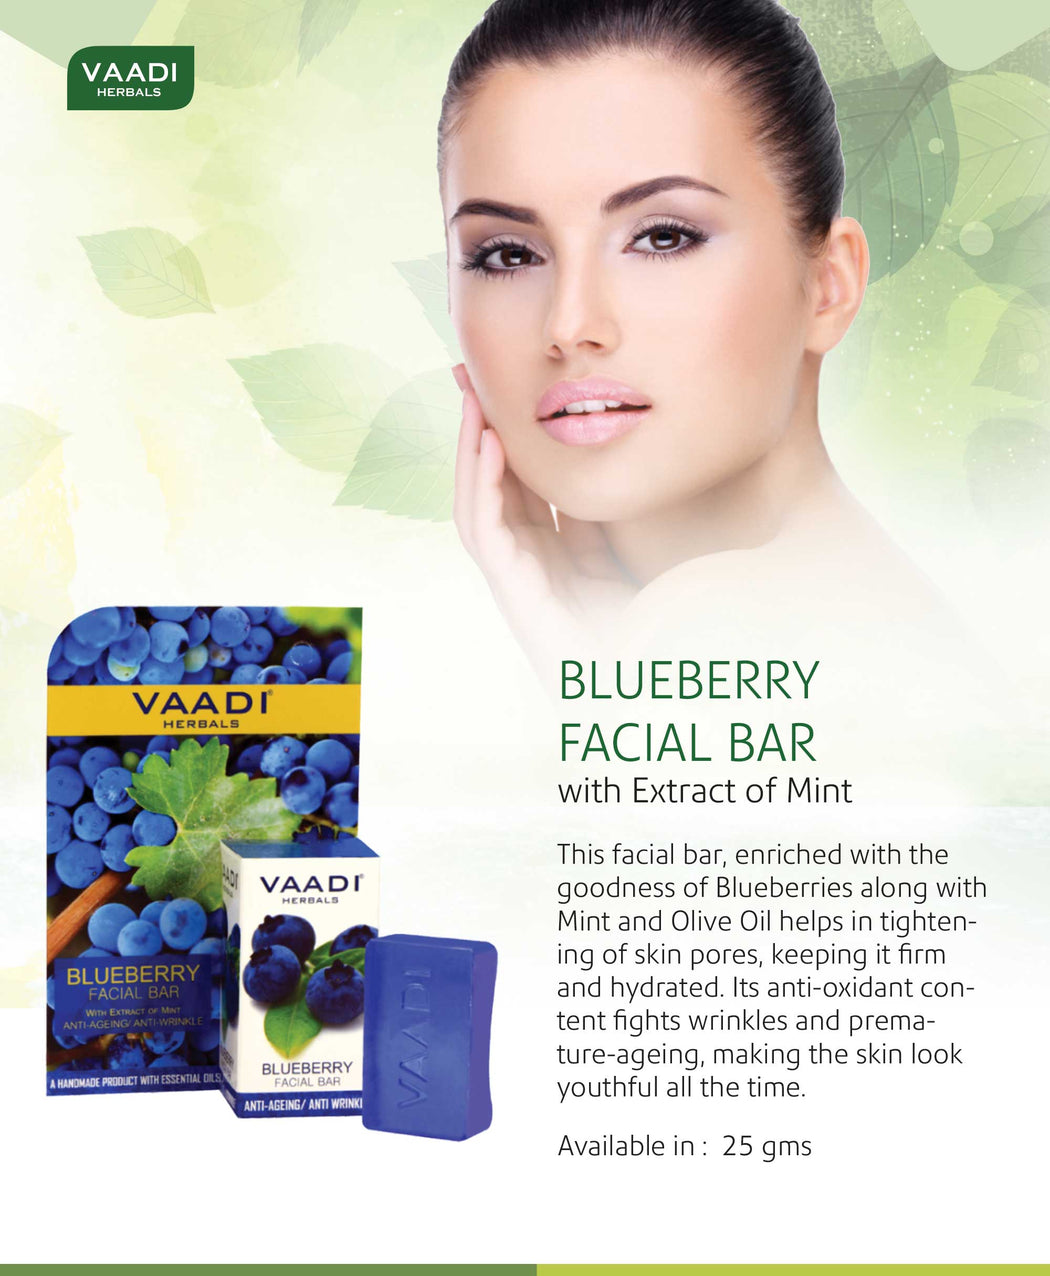 Blueberry Facial Bar with Extract of Mint (25 gms)